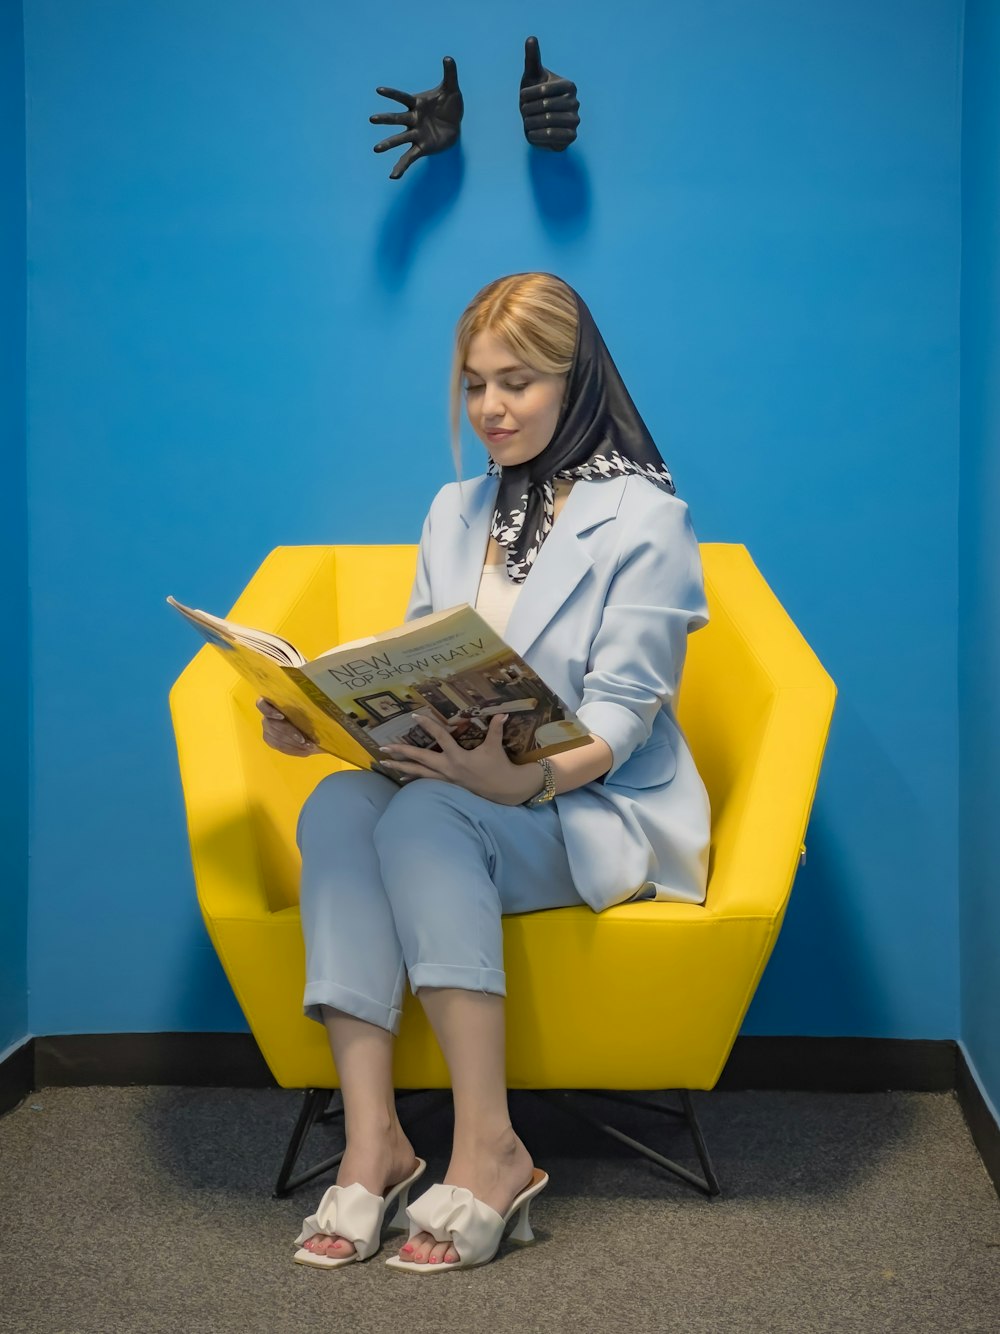 a woman sitting on a yellow chair reading a newspaper